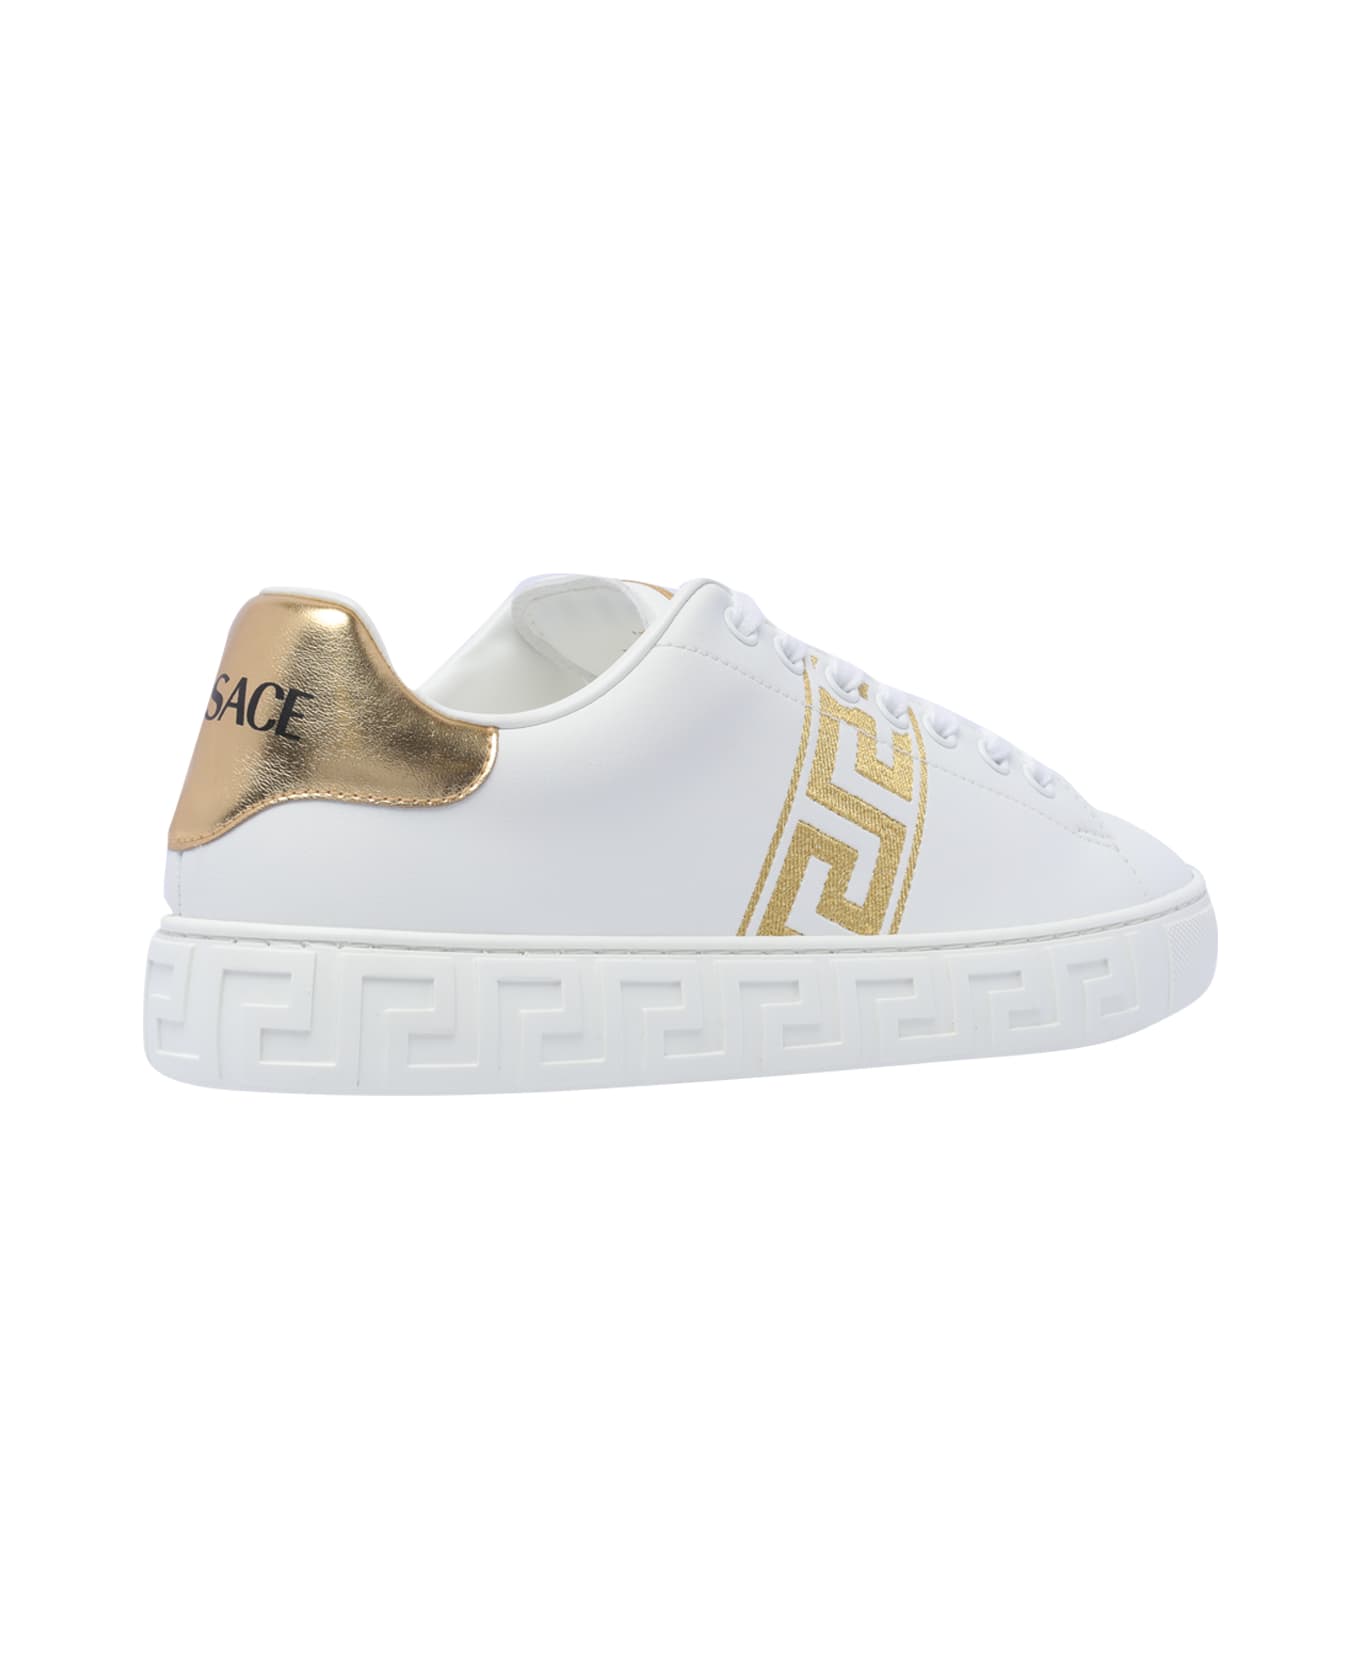 Versace Greca Embroidered Sneakers - White